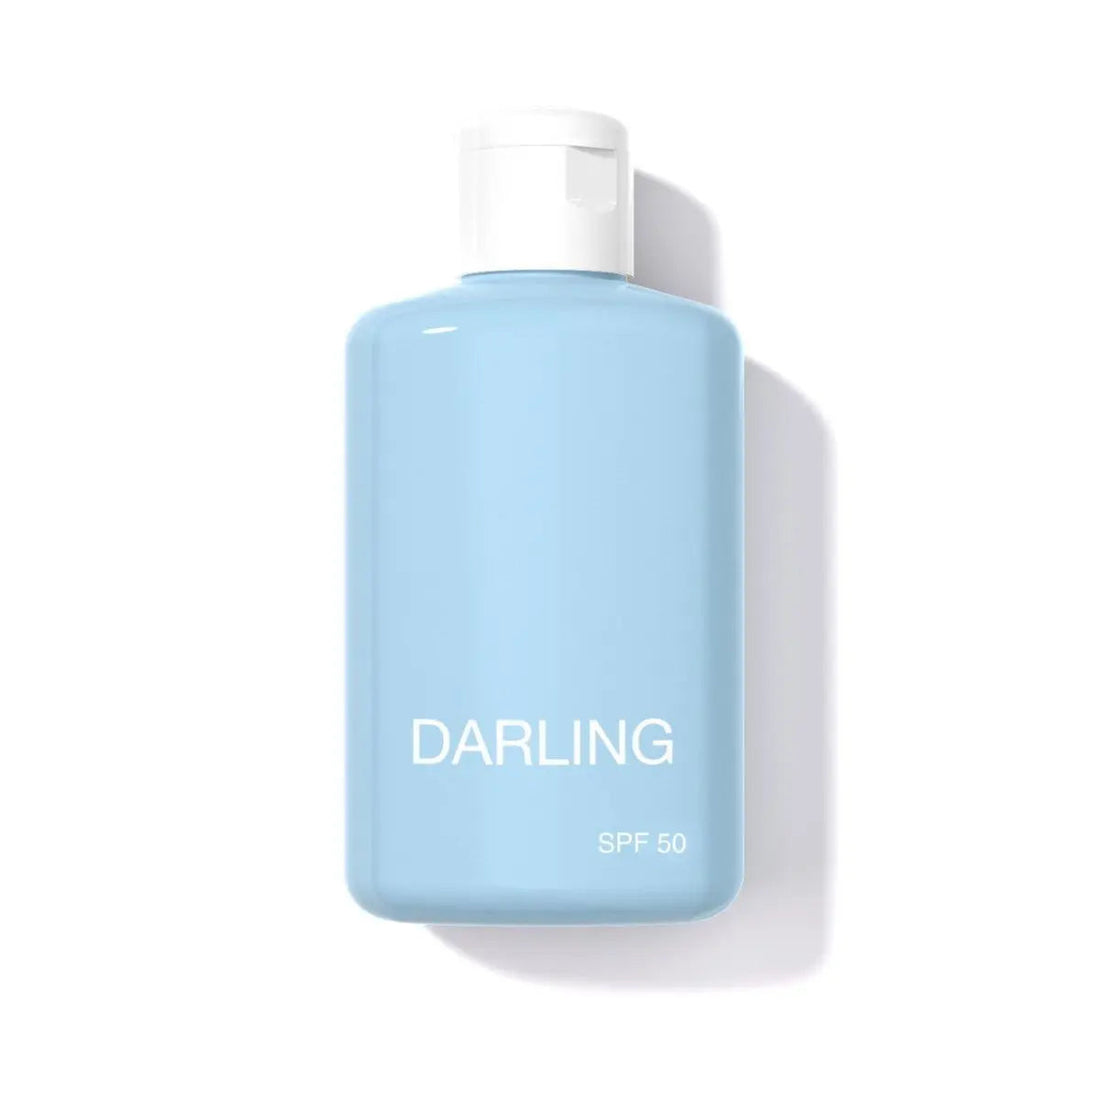 Darling High Protection Emulsion SPF 50 150ml